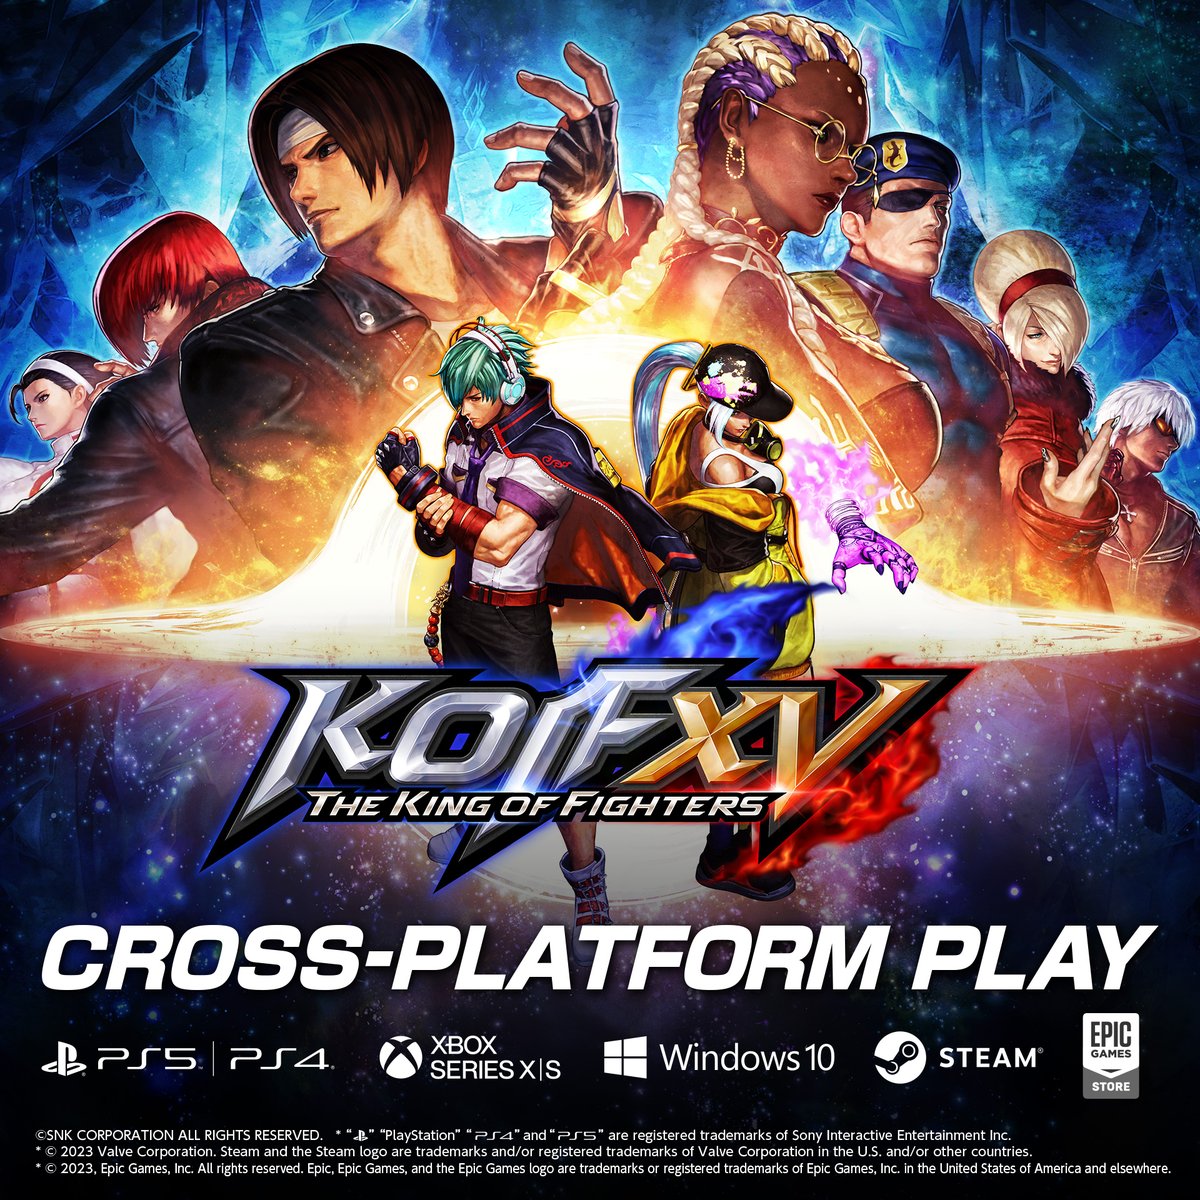 📰GOENITZ is now available on KOF15 as a FREE DLC character! Alongside Crossplay update!